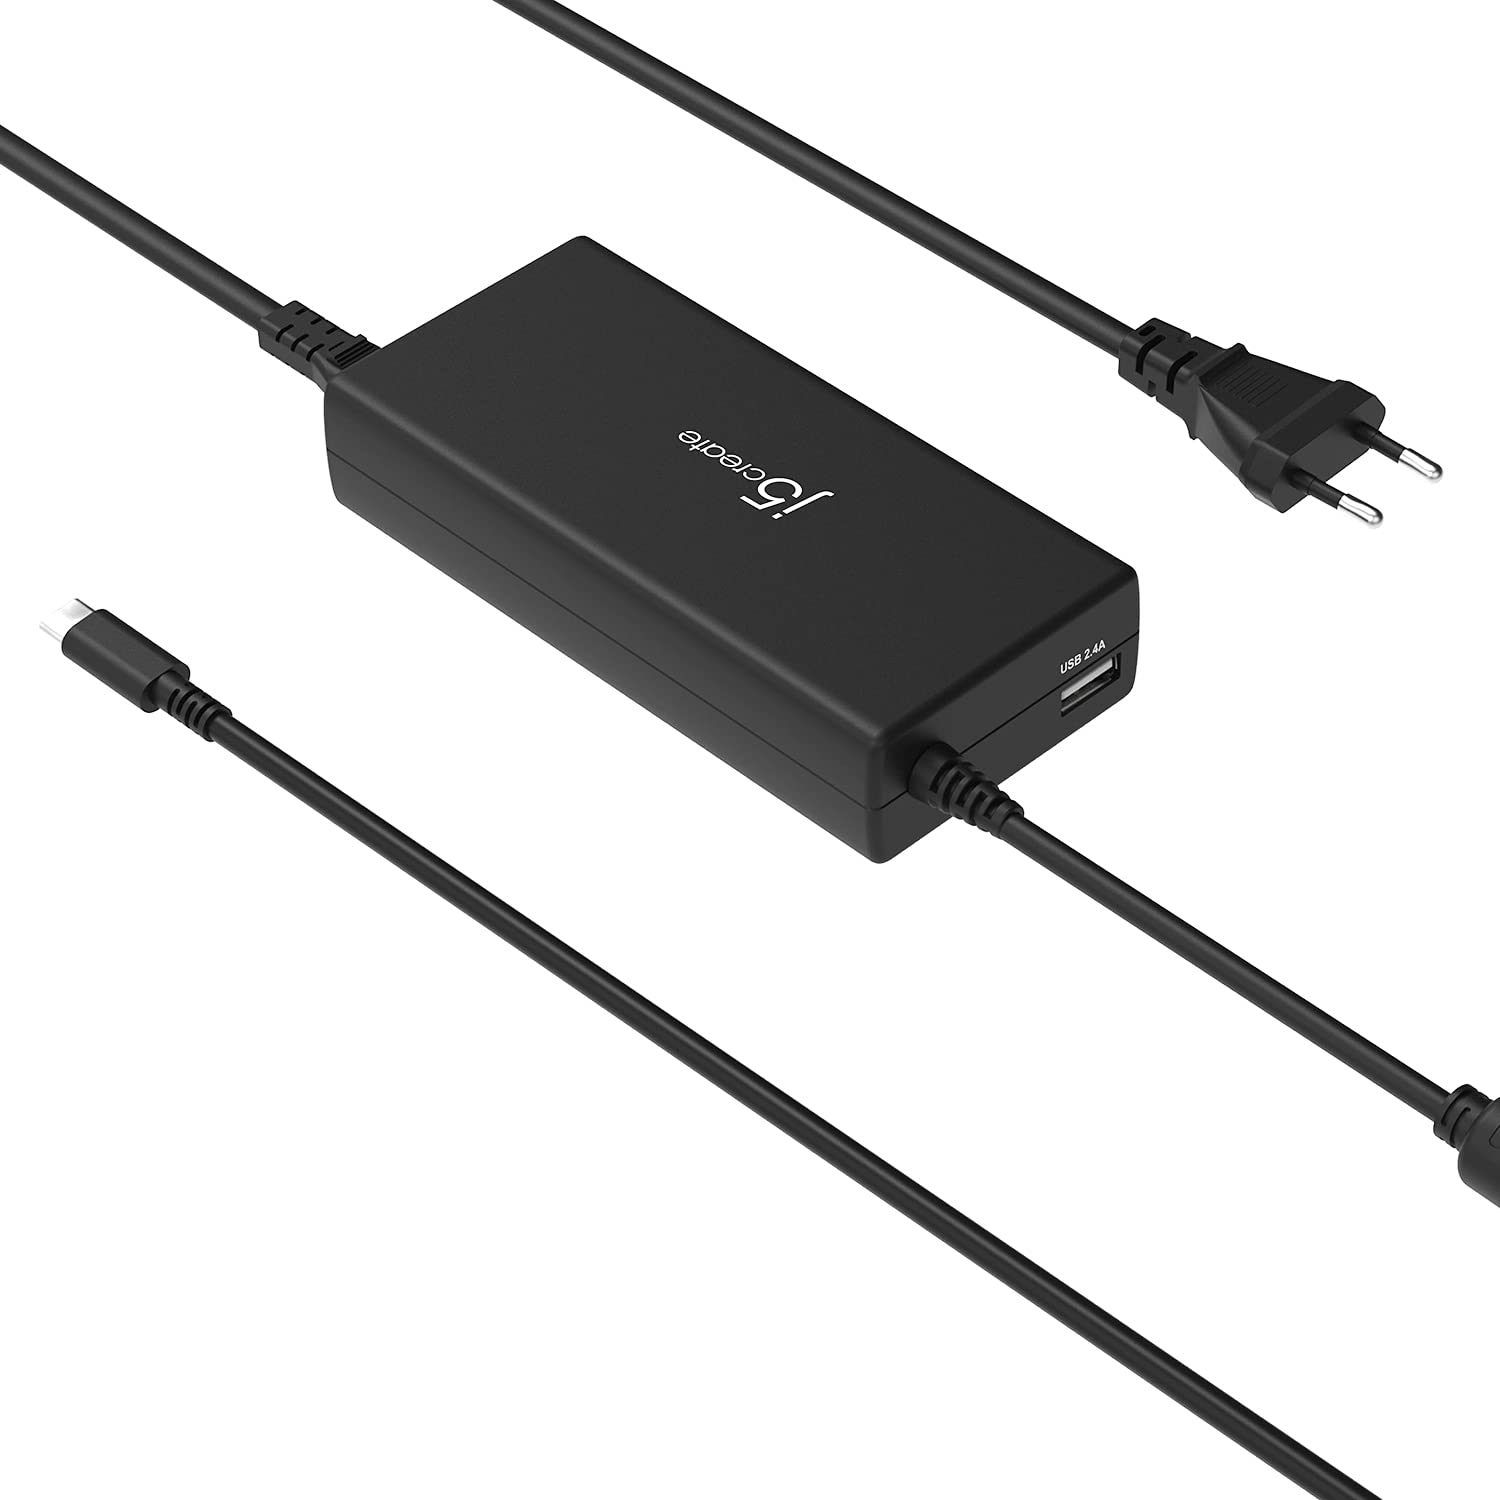 j5create USB Typ-c 100W PD Schnell-Ladegerät für MacBook Pro, Chromebook, Laptop, Notebook, Tablet, Android, iPhone, iPad Pro, Handys (JUP2290)